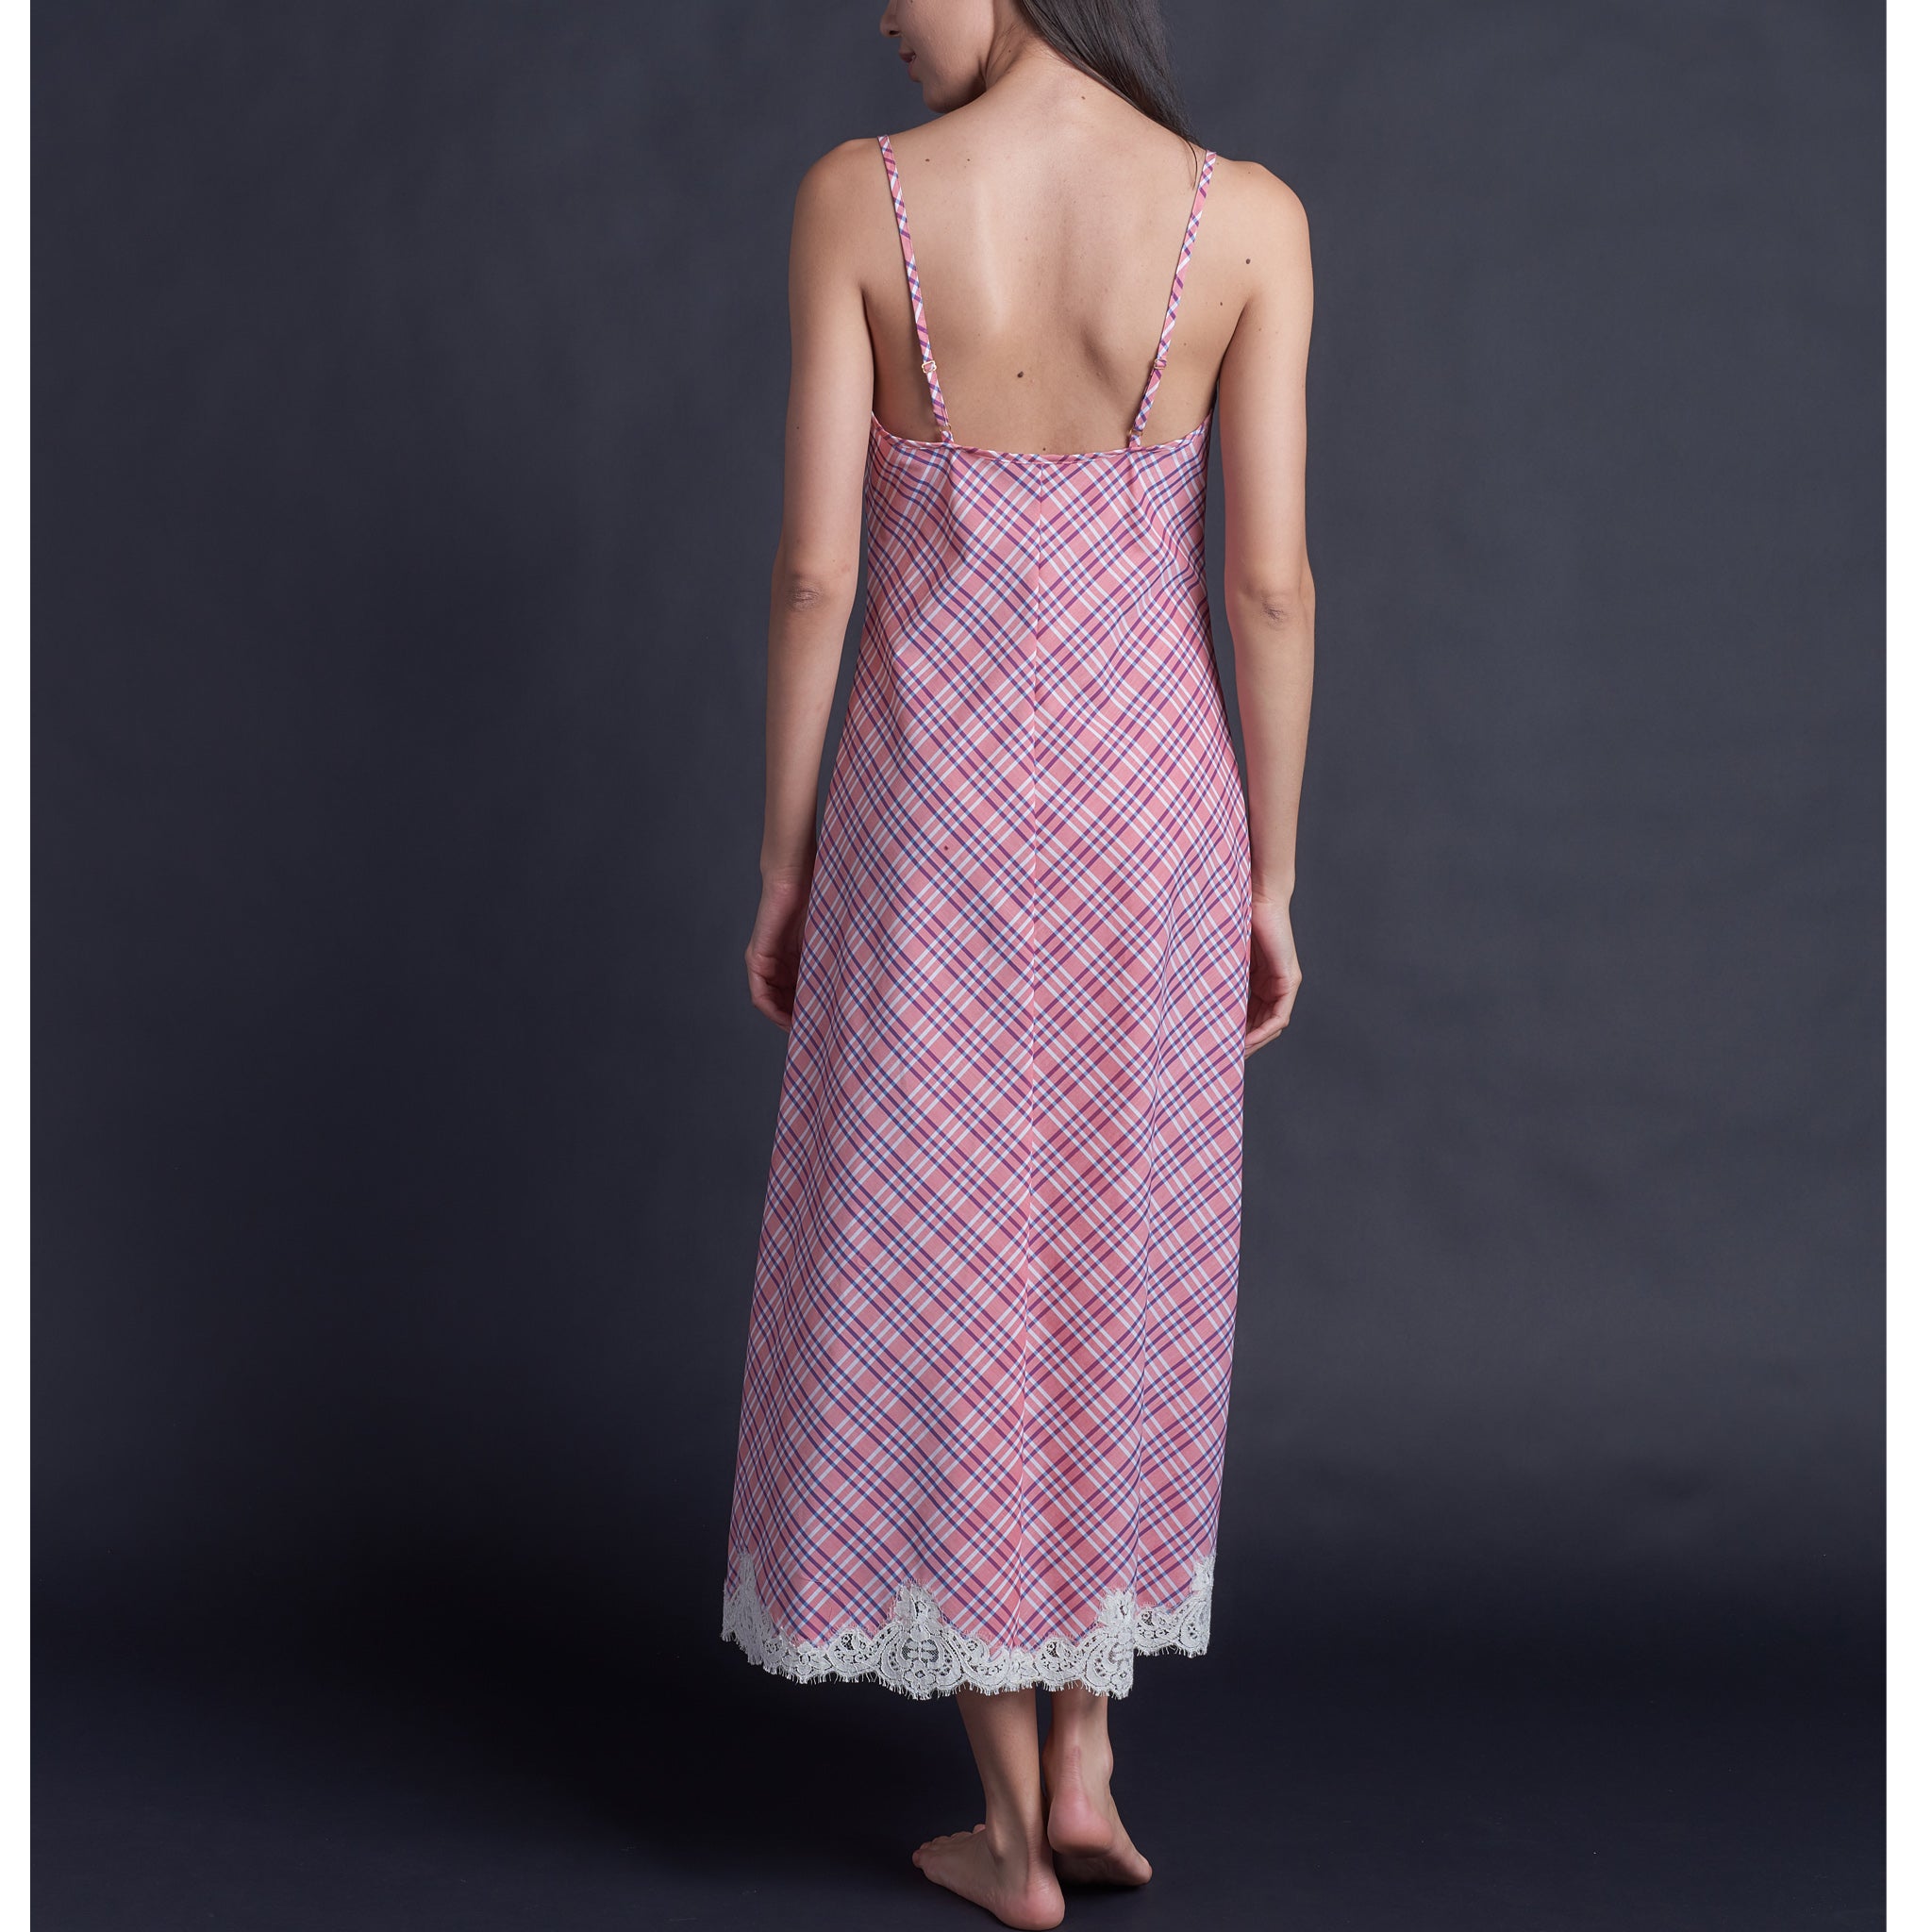 Juno Slip Dress in Italian Cotton Pink Plaid with Lace